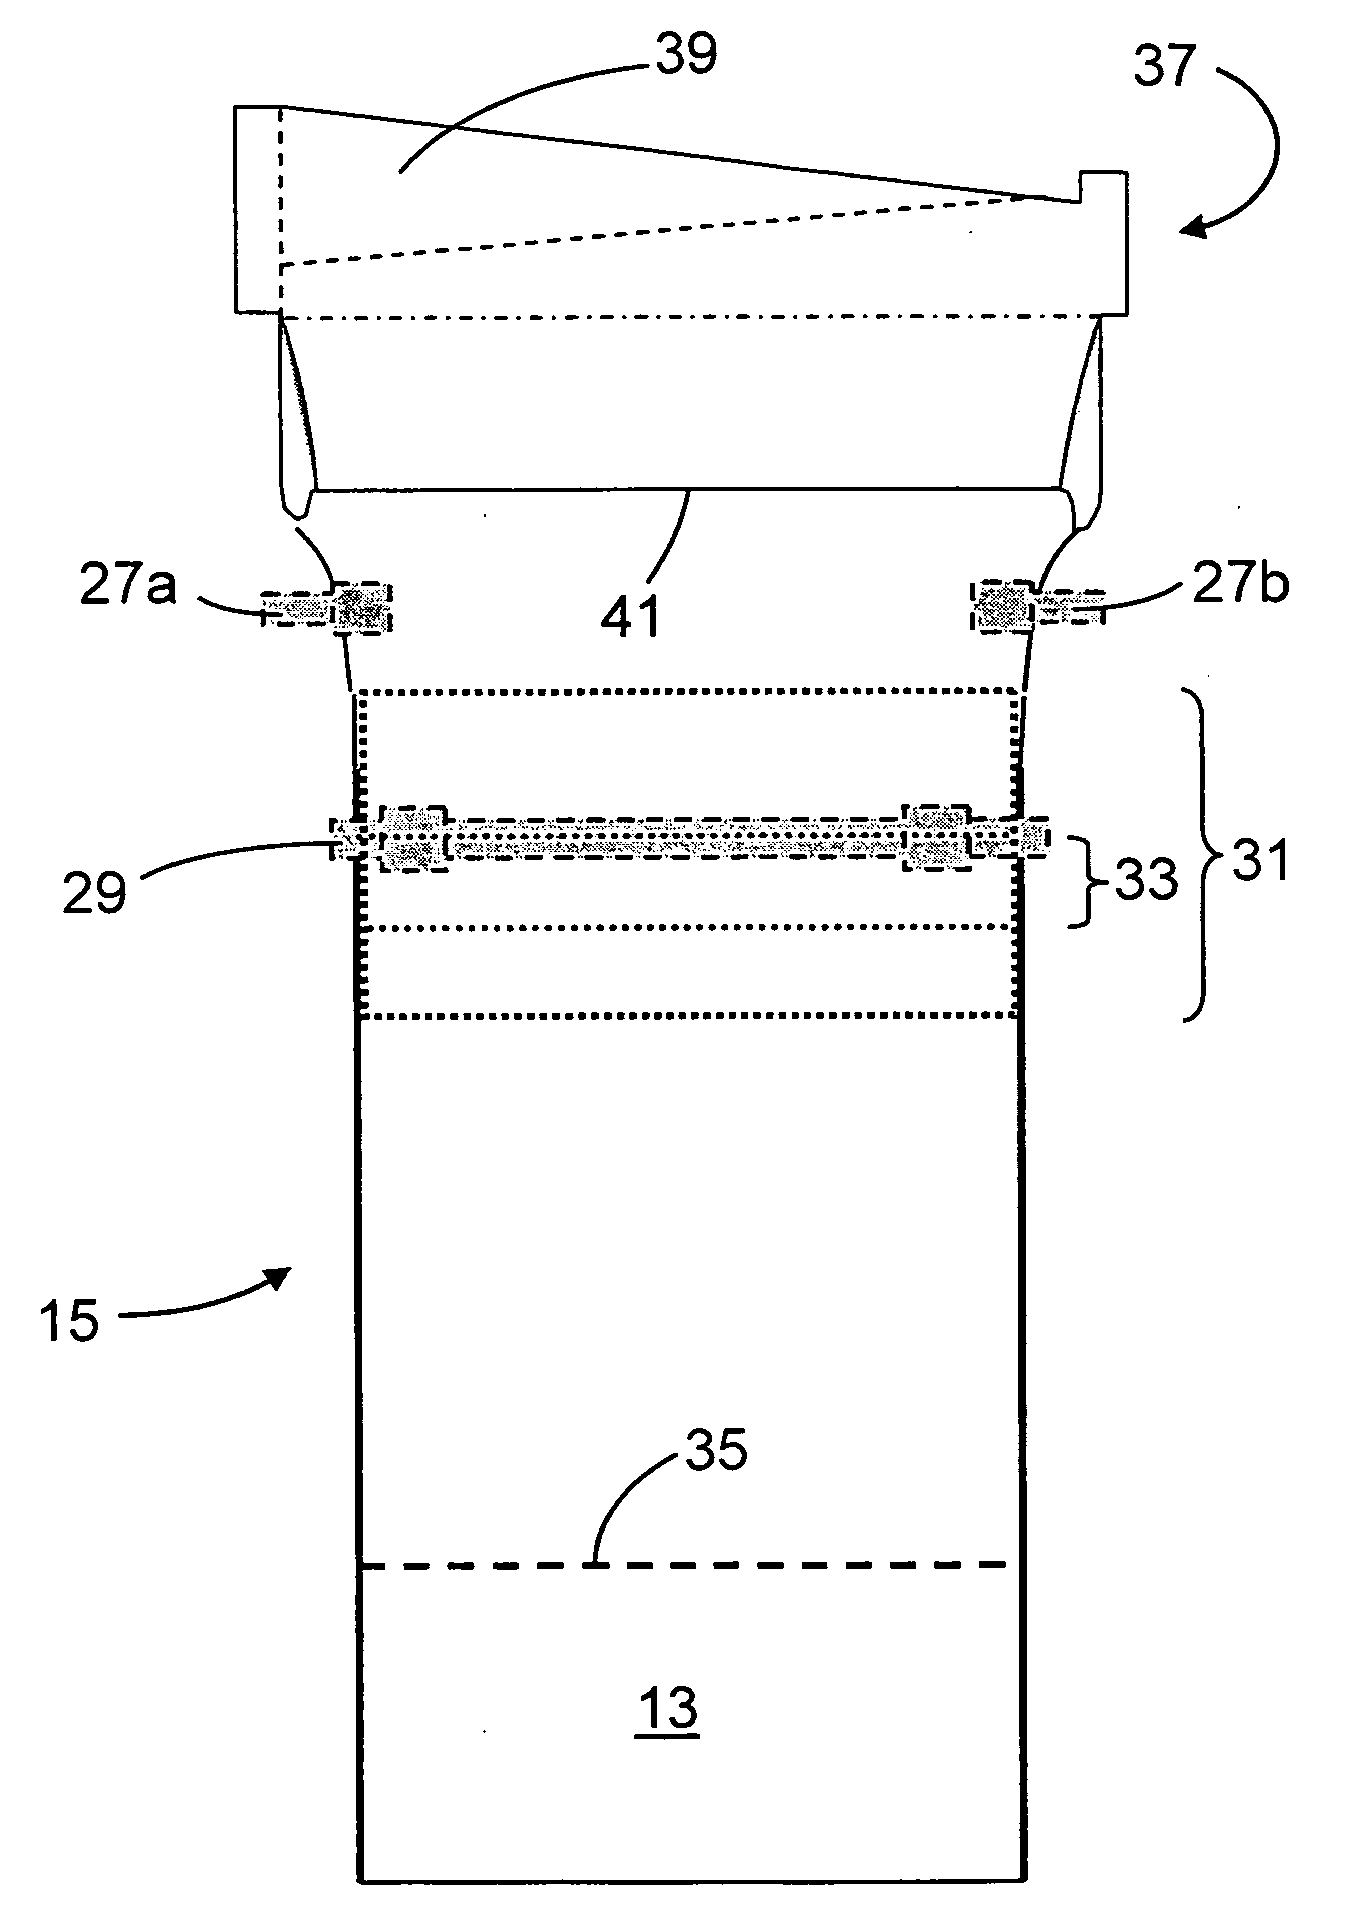 Methods of fabricating flat glass with low levels of warp